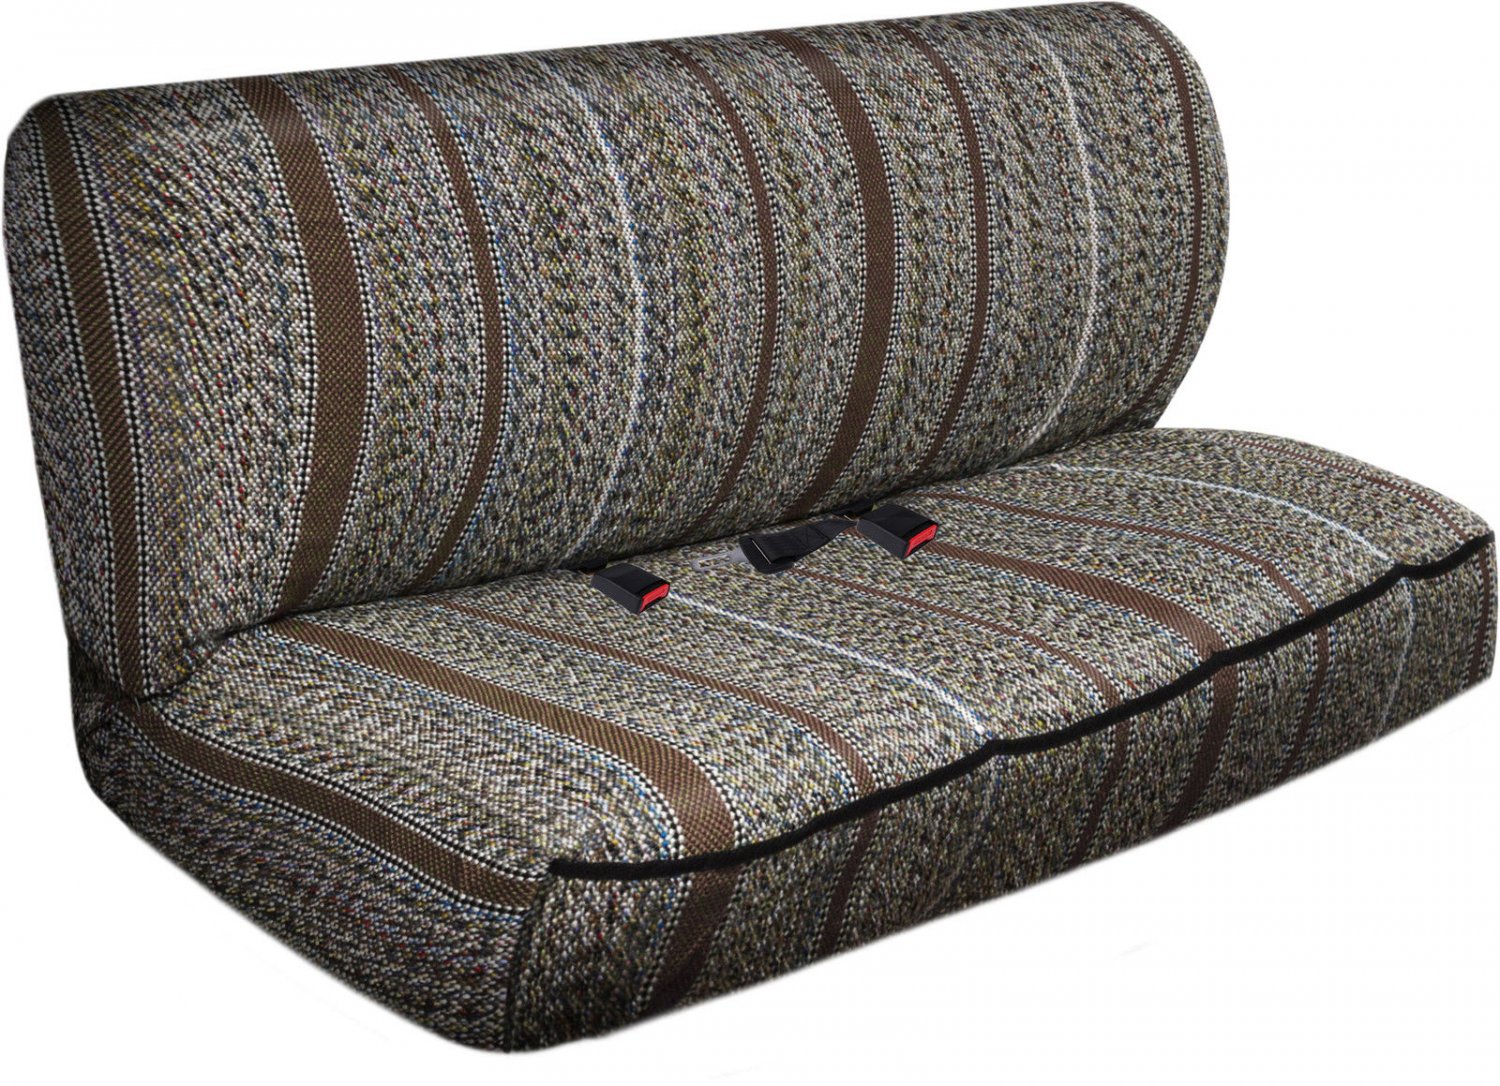 Car Seat Covers Brown Western Woven Saddle Blanket 2pc Bench For Auto